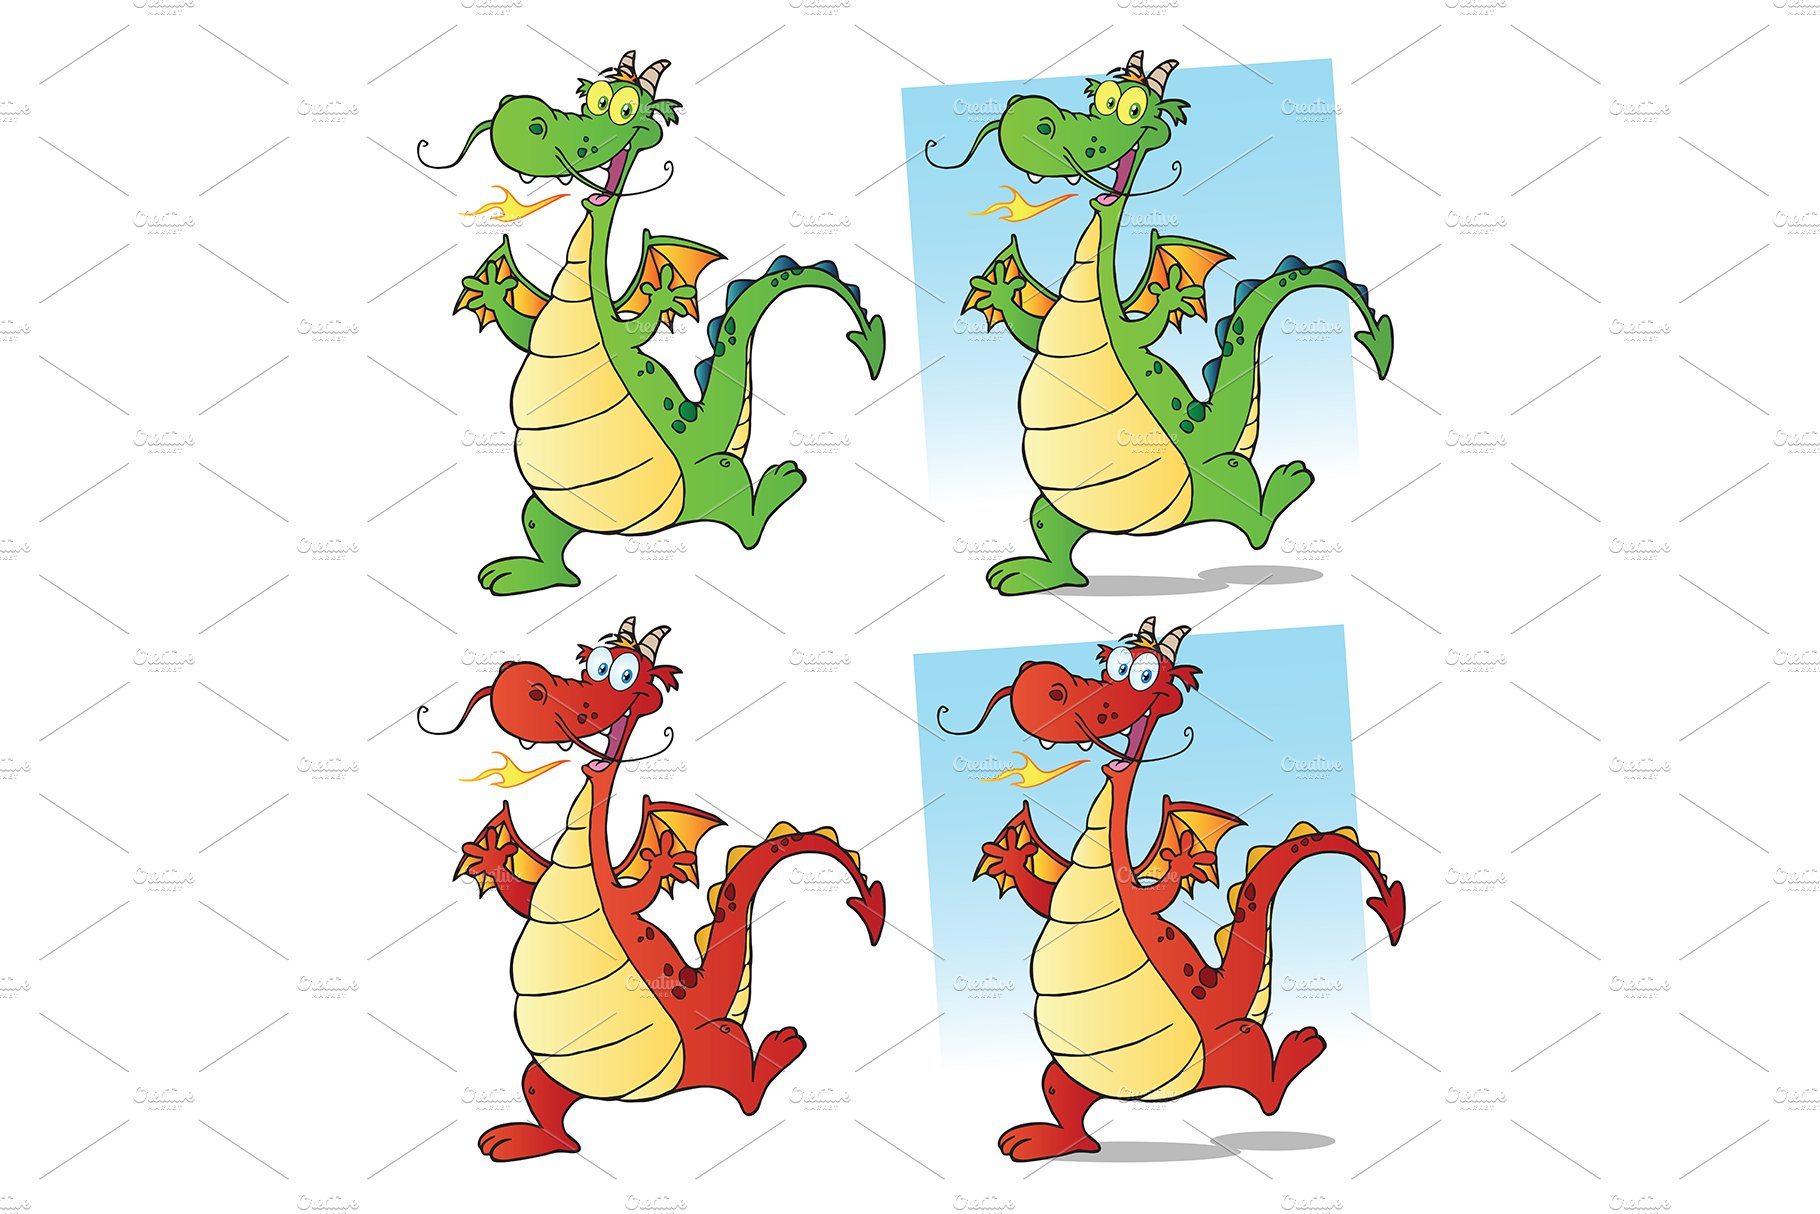 Dragon Cartoon Character Collection cover image.